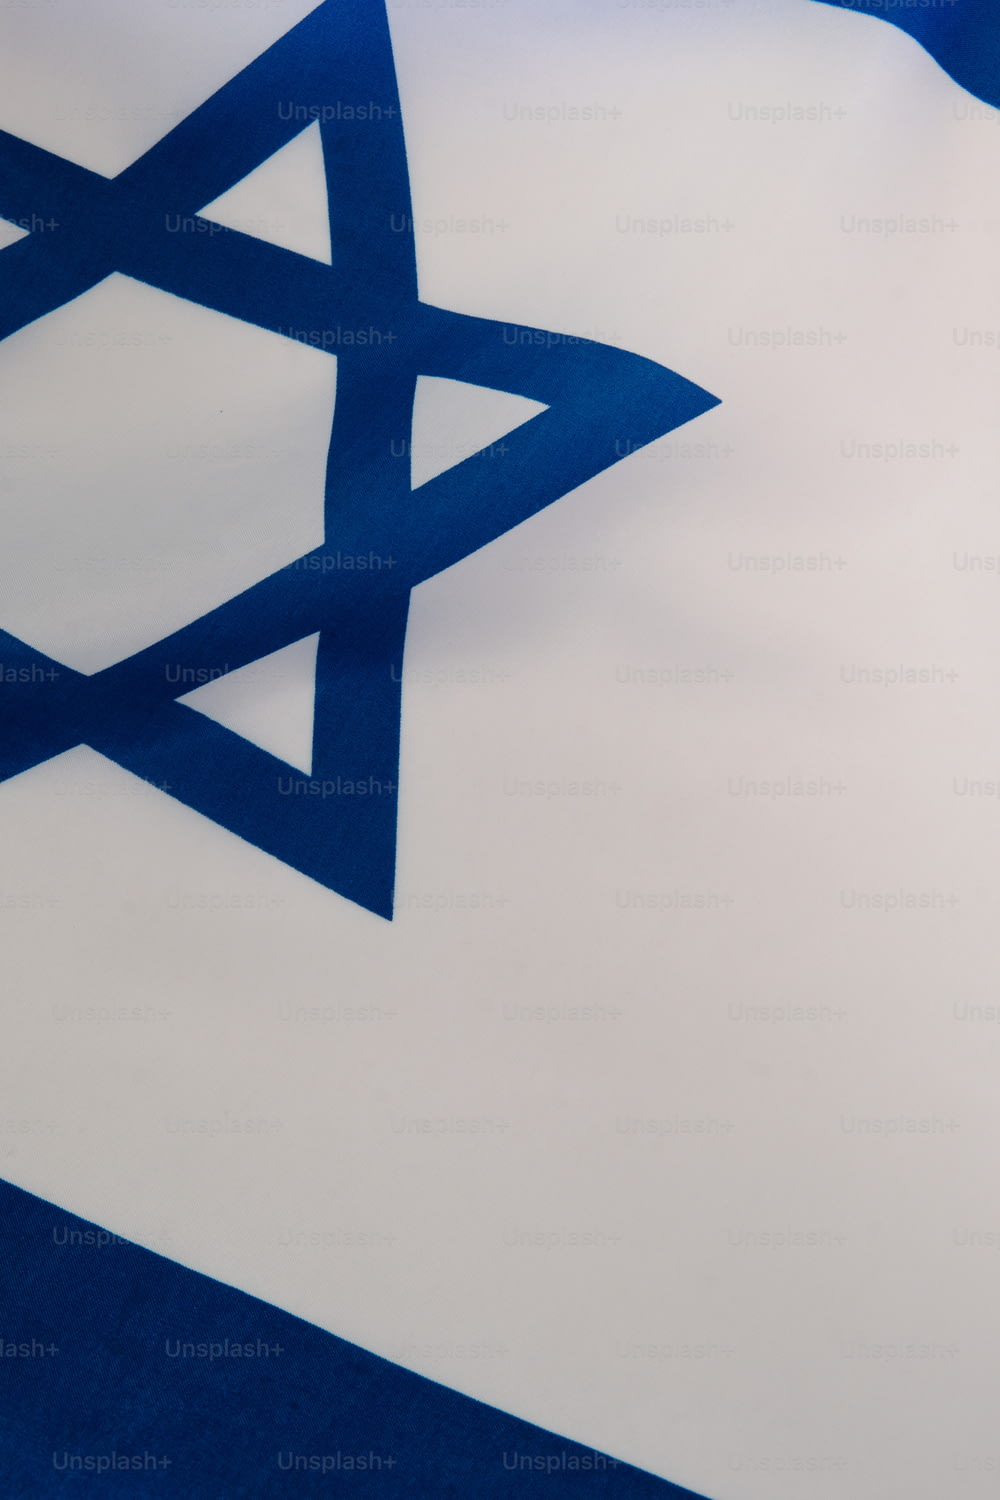 a blue and white flag with a star of david on it